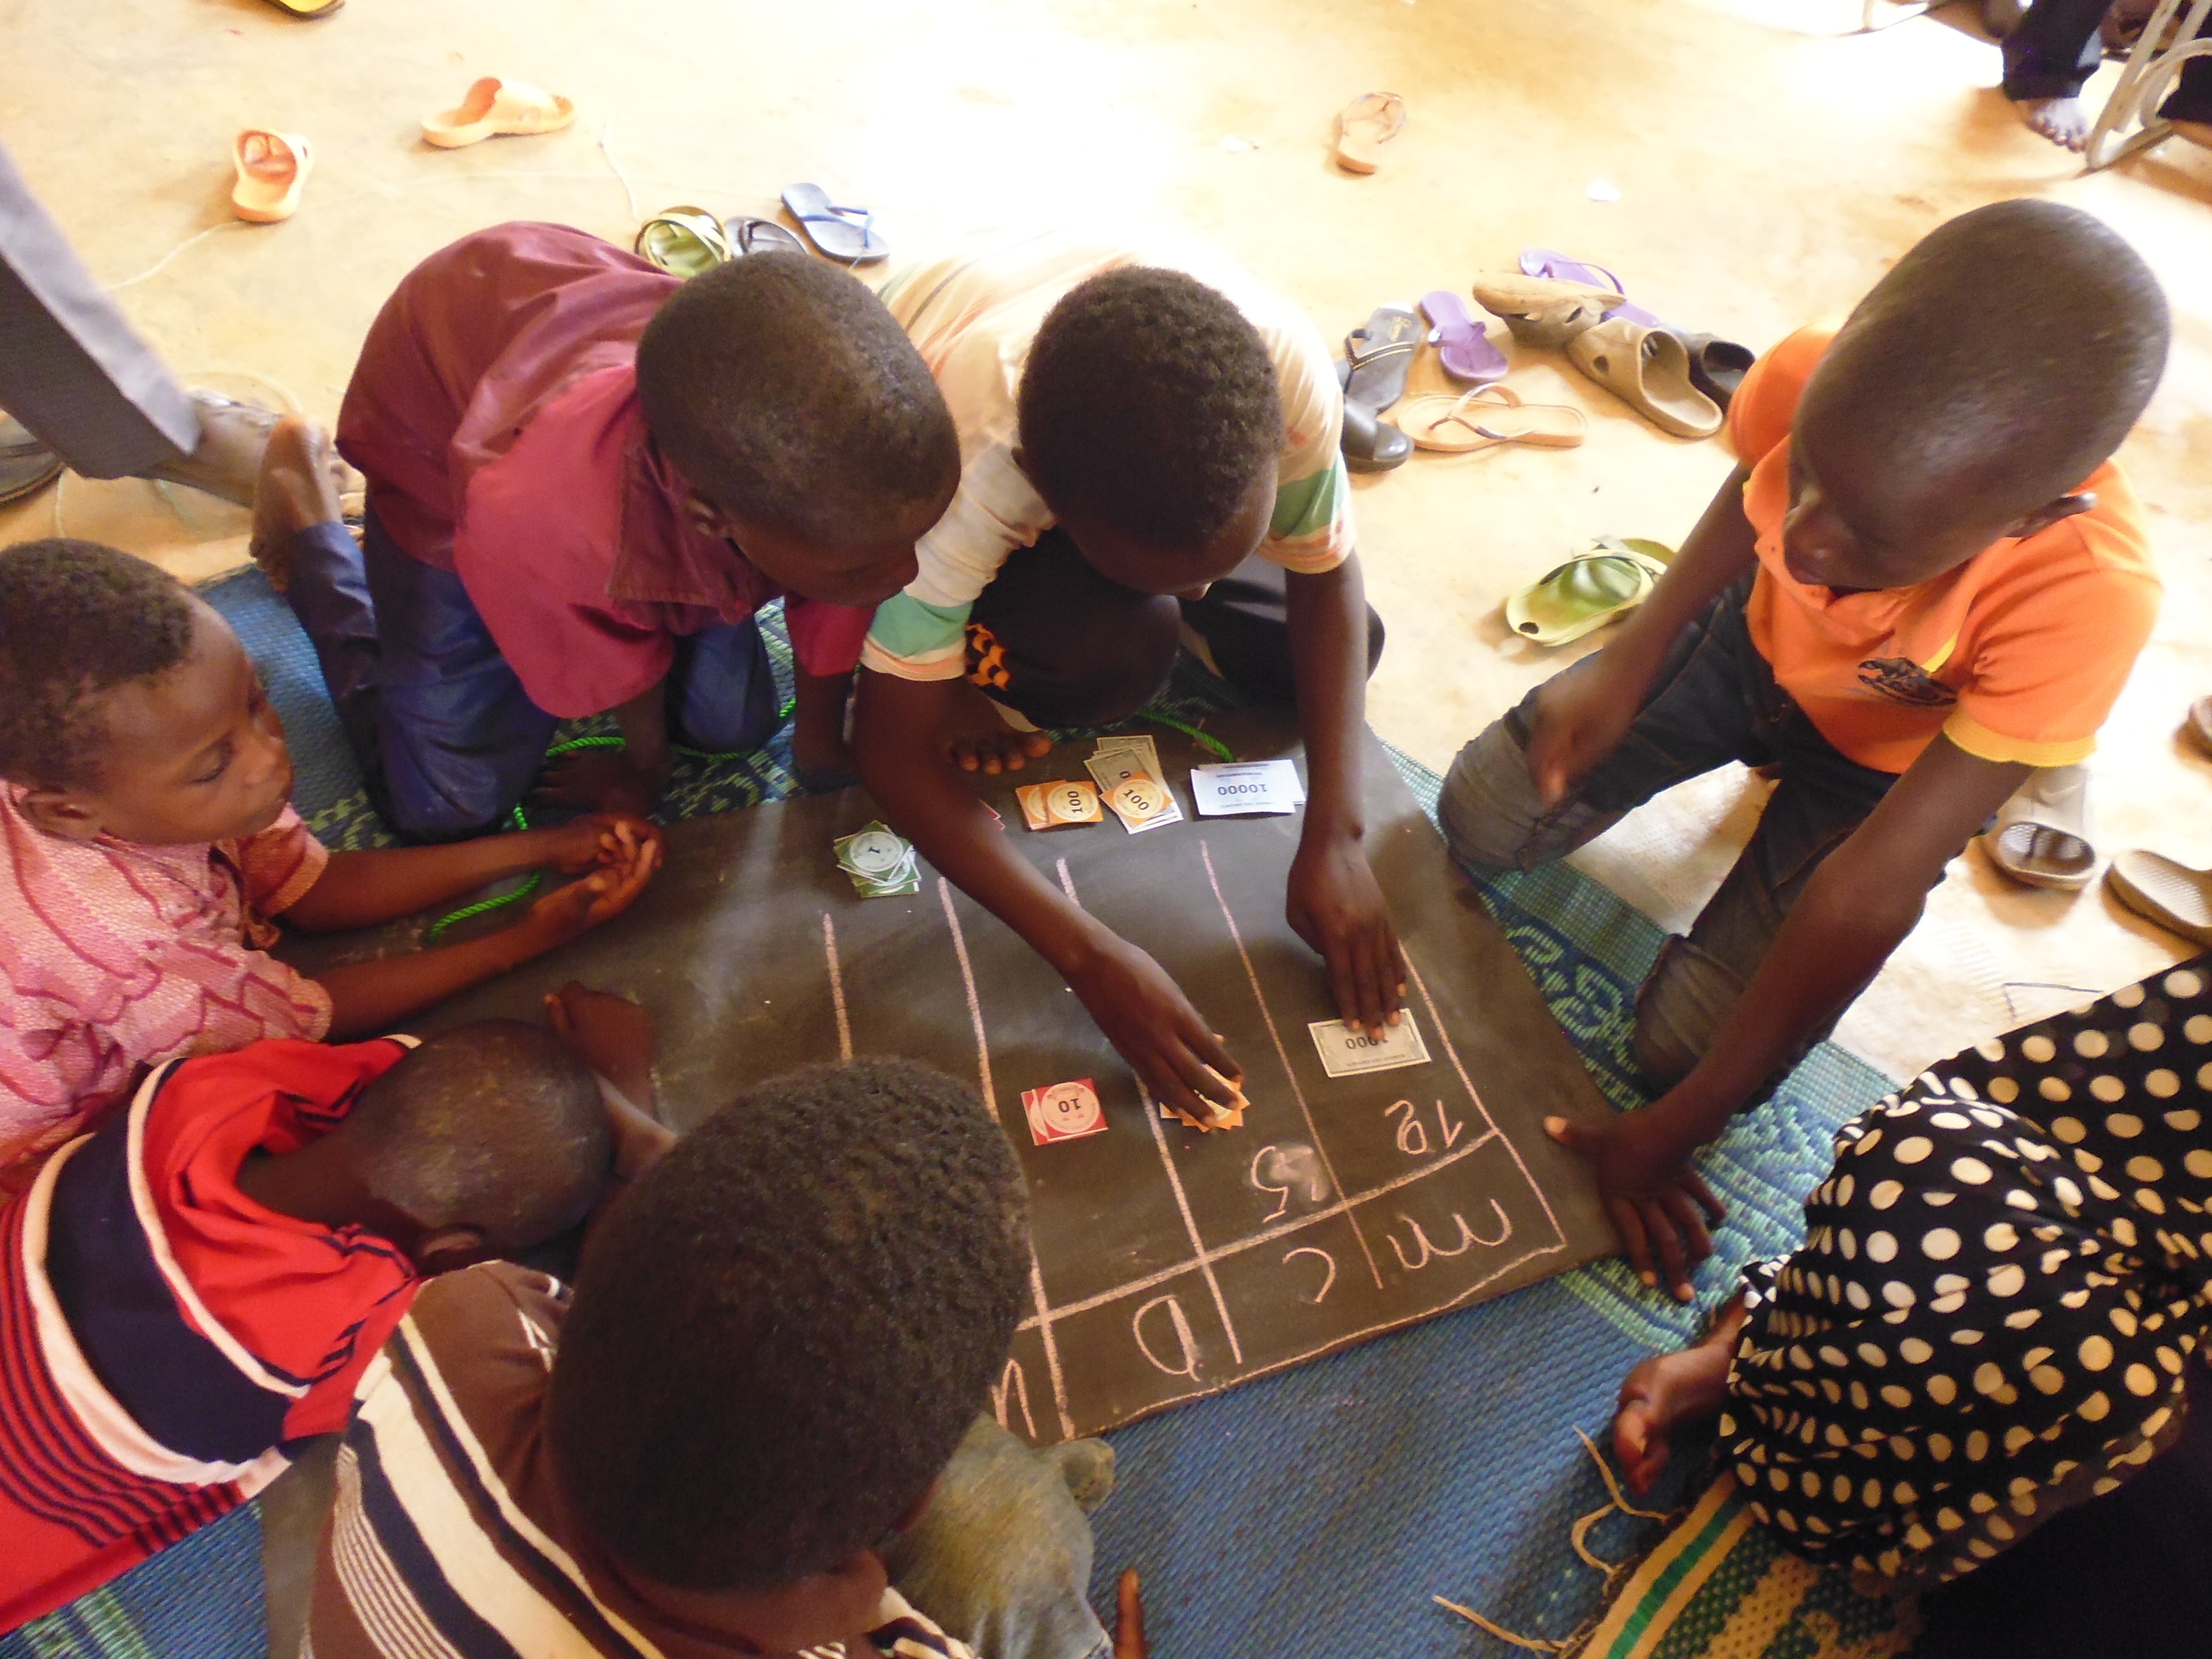 Seven children sit on the floor in a circle, with a chalkboard on the floor in the middle of them. One child places play money notes onto the board while the other children watch during a Teaching at the Right Level-integrated PMAQ programme in a classroom in Niger.